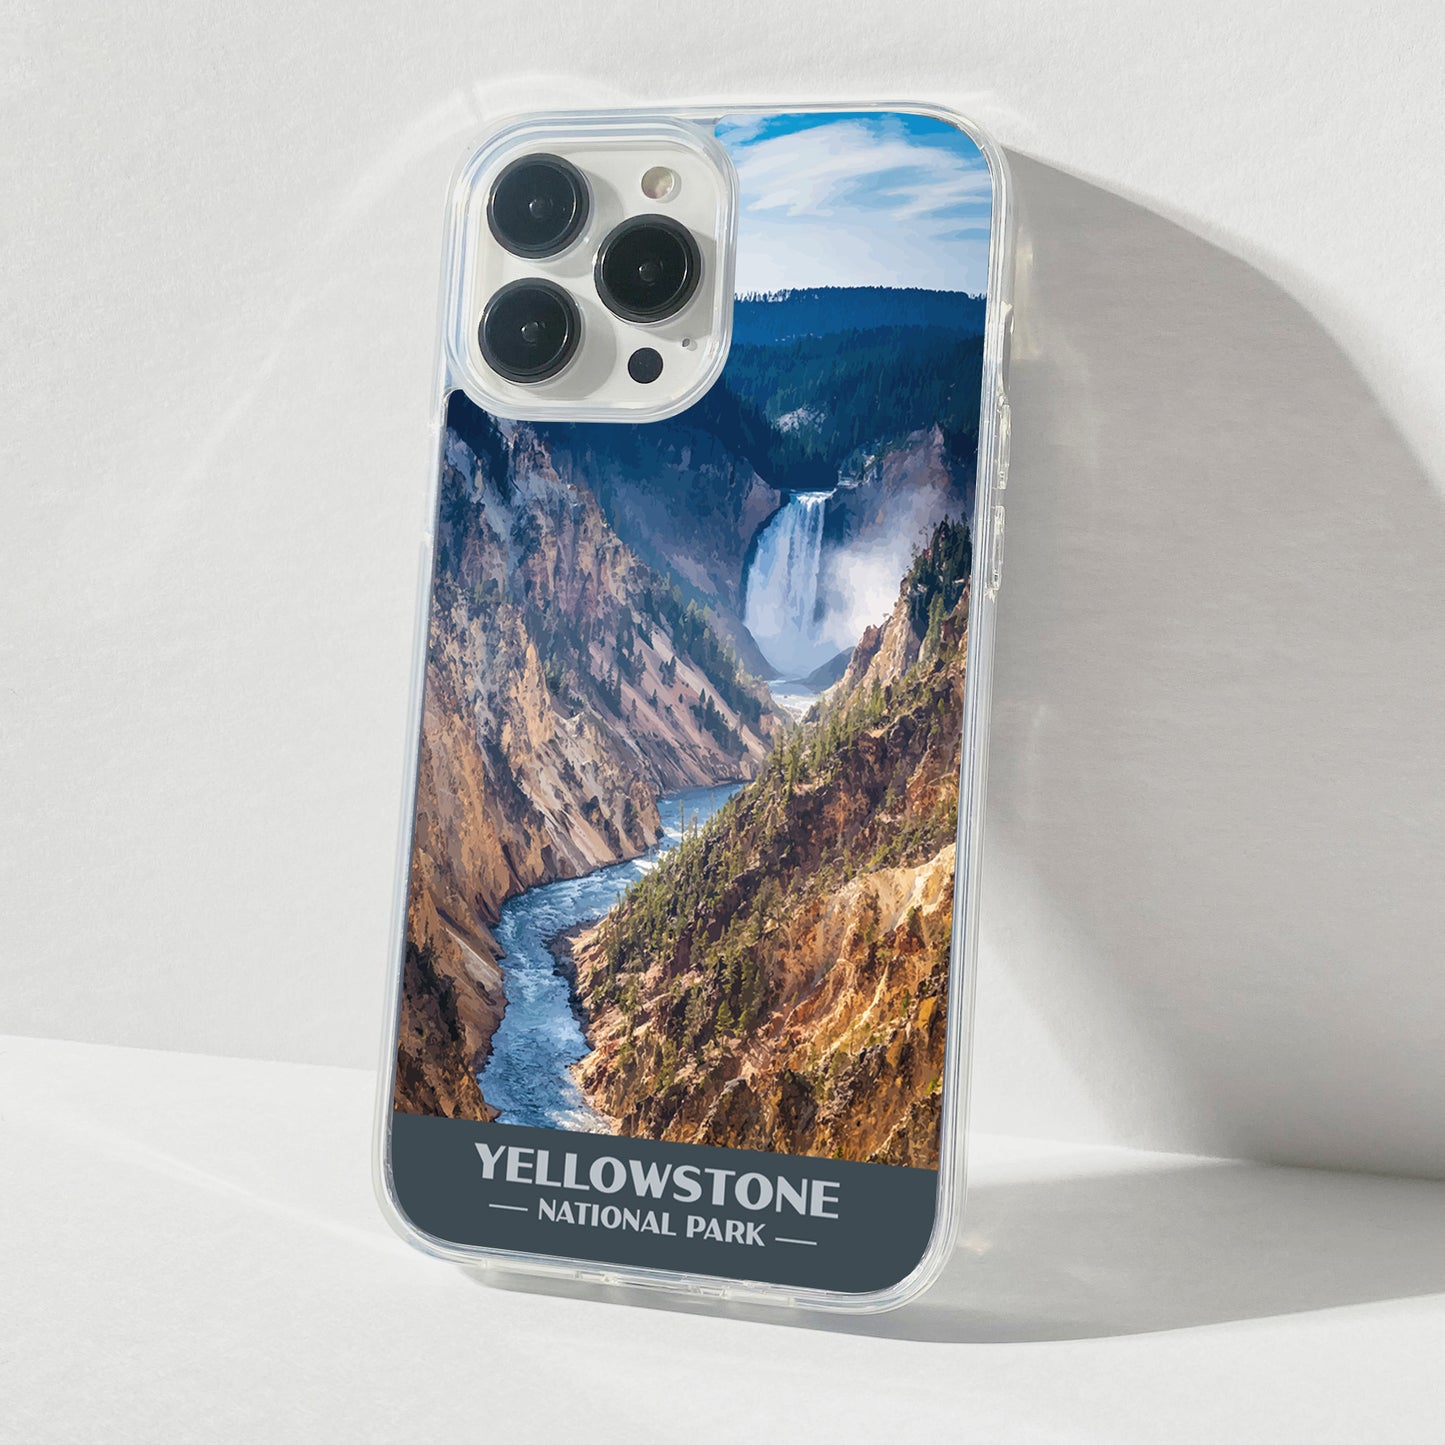 Yellowstone National Park Phone Case (Grand Canyon of the Yellowstone)